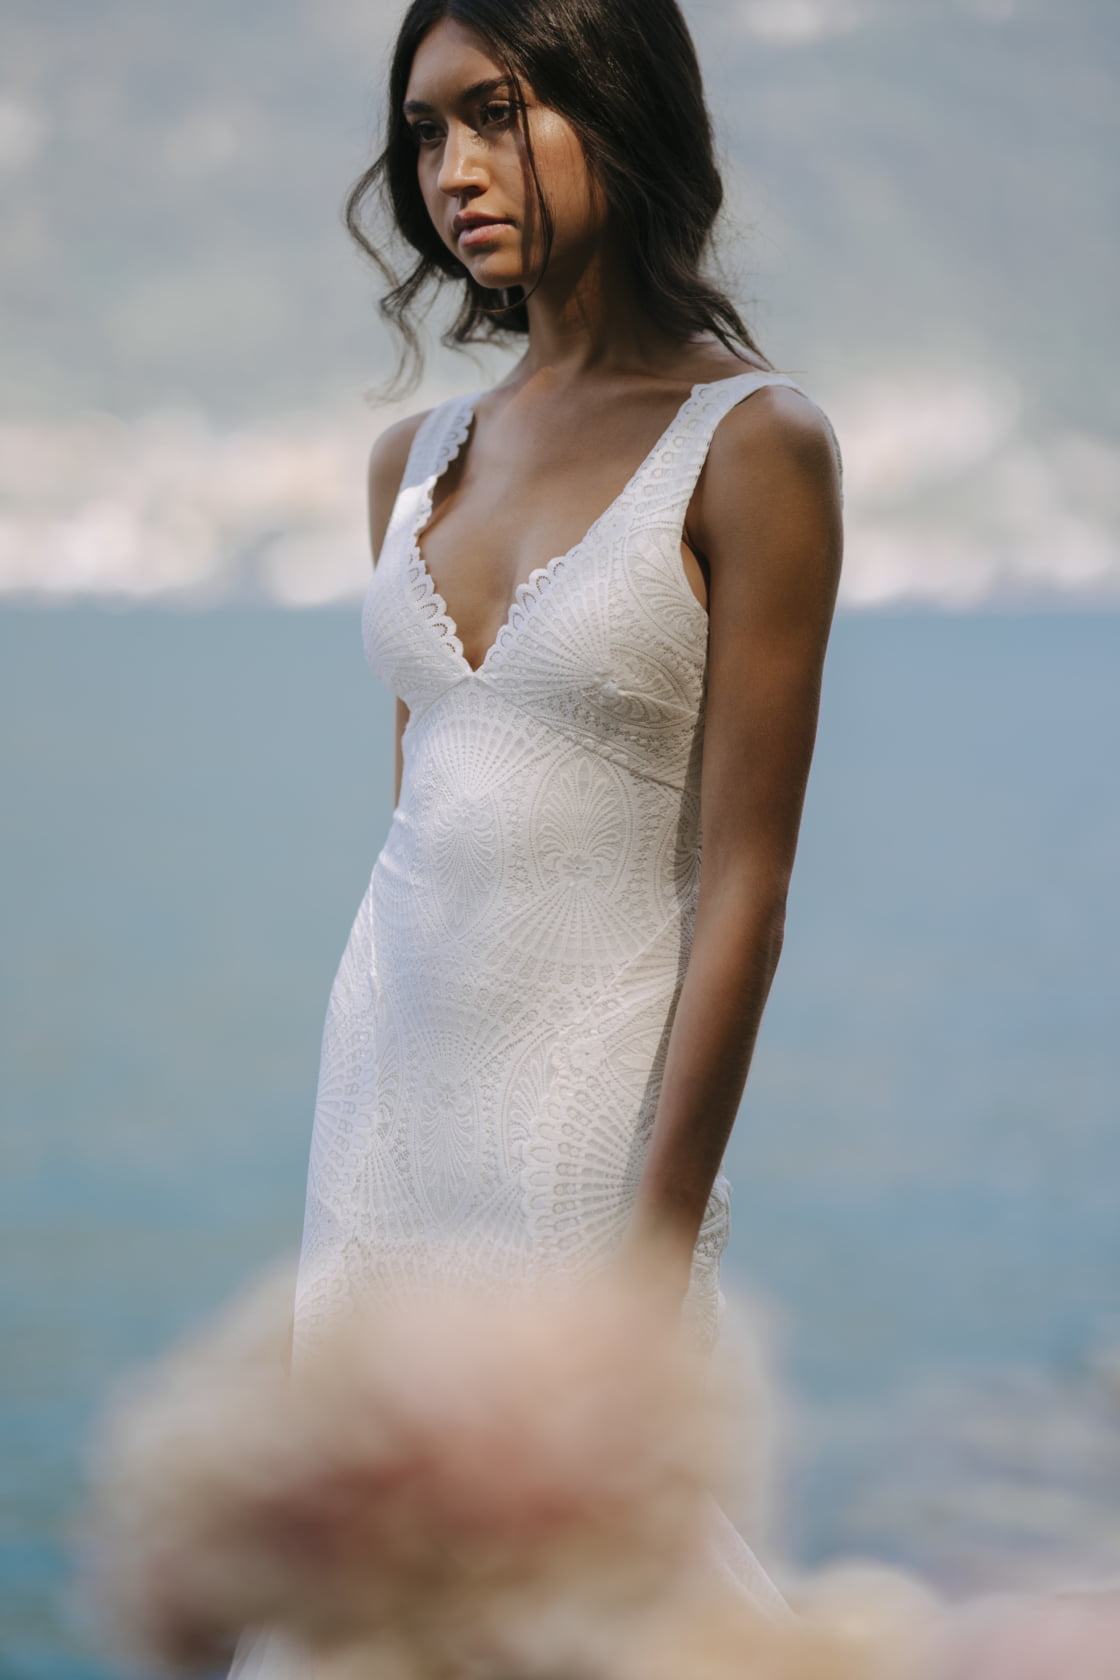 Grace Loves Lace - Are you a SILK woman or a LACE woman? ⁠ ⁠ Our DOVE gown  worn by GRACE dream girl Narah. ⁠ ⁠ Try her on in one of